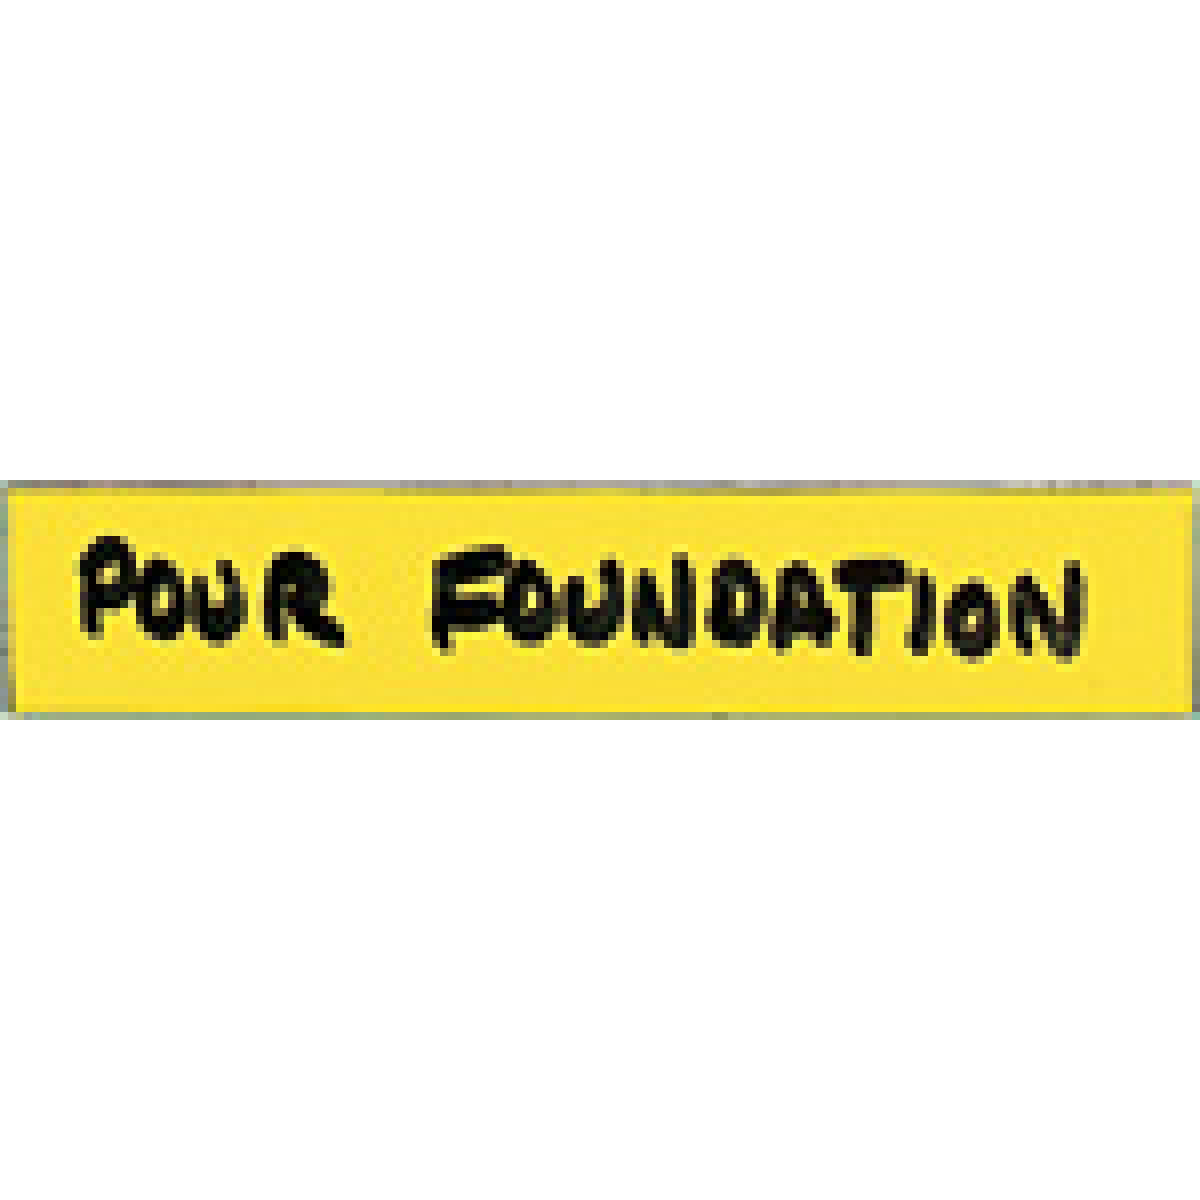 sample 3/8"x2" inch yellow magnet